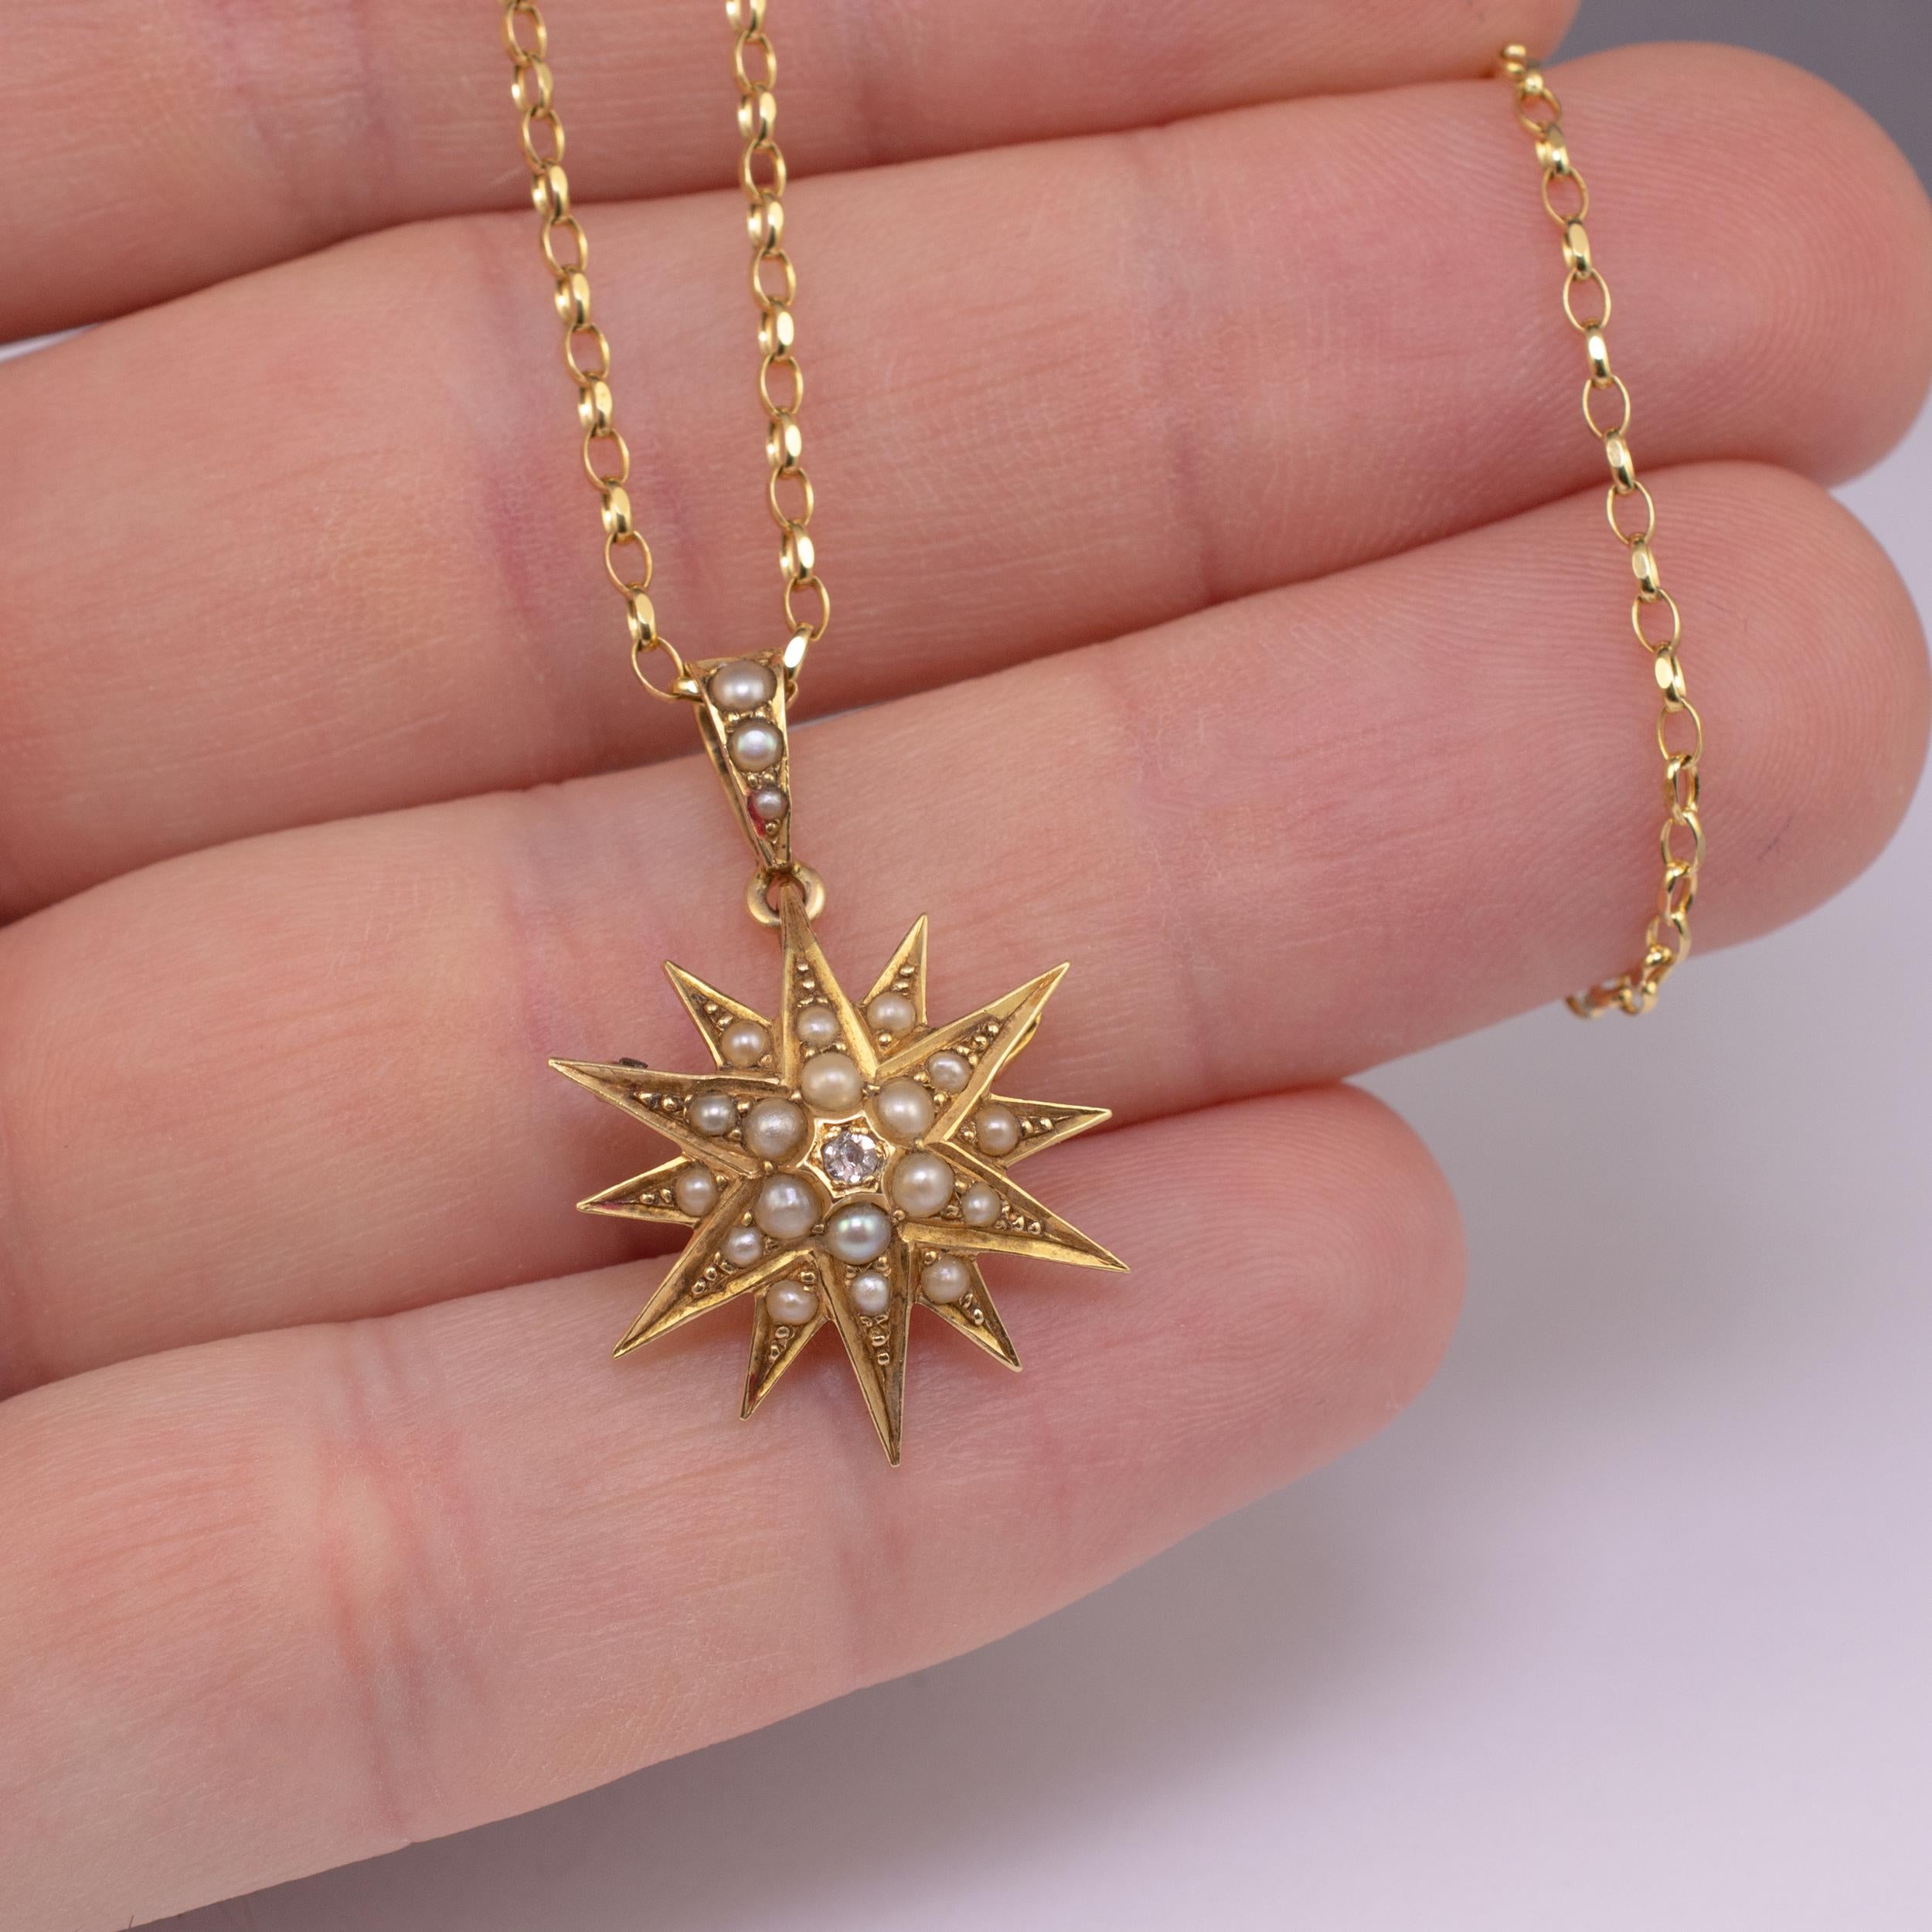 This fine quality antique diamond and pearl star shape pendant brooch is crafted in 18 karat yellow gold.

The early 20th century piece can be worn as a pendant or brooch to suit. It is expertly handcrafted into a domed 12 pointed star and adorned